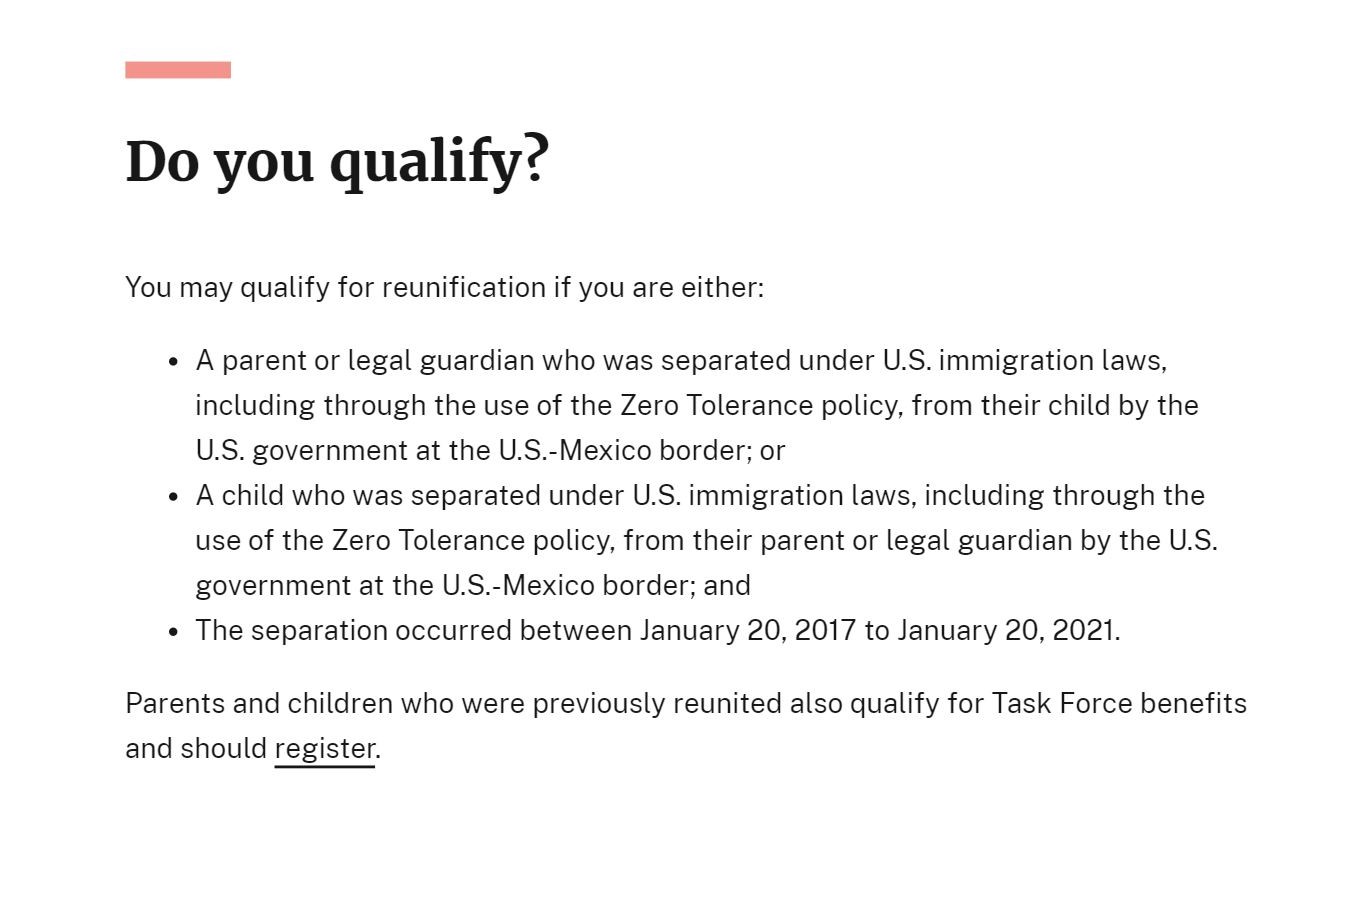 A graphic that reads out, "Do you qualify? You may qualify for reunification if you are either: 1. A parent or legal guardian who was separated under U.S. immigration laws, including through the use of the Zero Tolerance policy, from their child by the U.S. government at the U.S.-Mexico border; 2. A child who was separated under U.S. immigration laws, including through the use of the Zero Tolerance policy, from their parent or legal guardian by the U.S. government at the U.S.-Mexico border; 3. The separation occurred between January 20, 2017 to January 20, 2021. Parents and children who were previously reunited also qualify for Task Force benefits and should register.